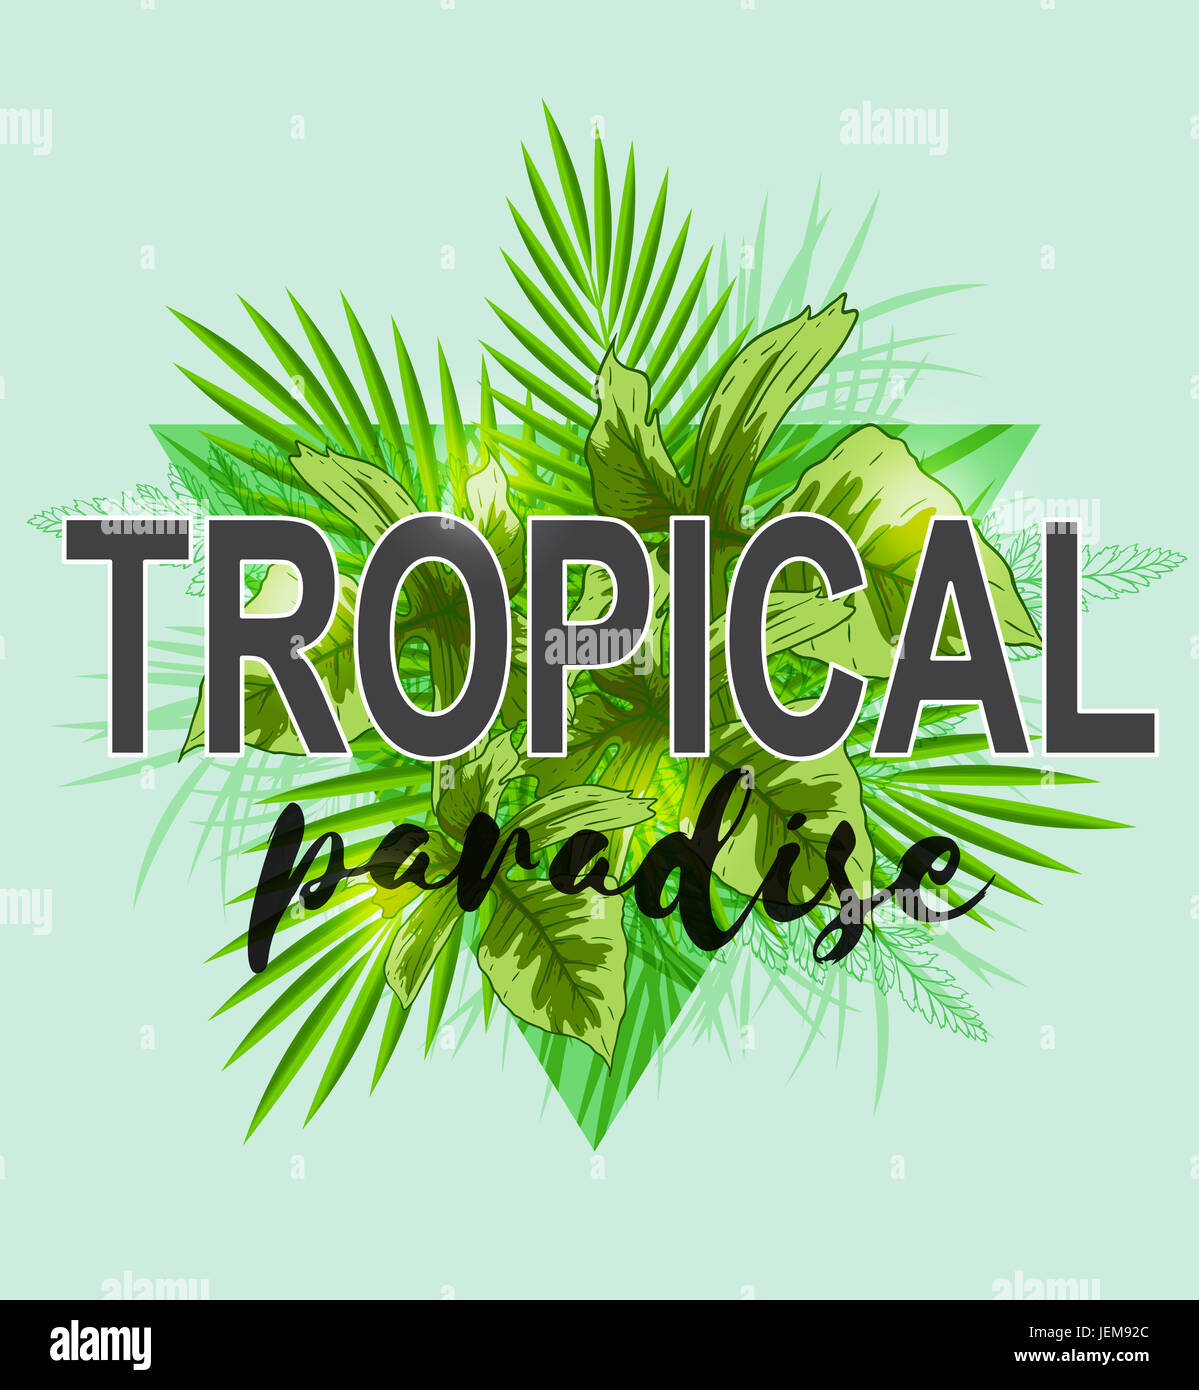 Abstract triangle tropical background with green palm leaves. Tropical paradise lettering Stock Photo